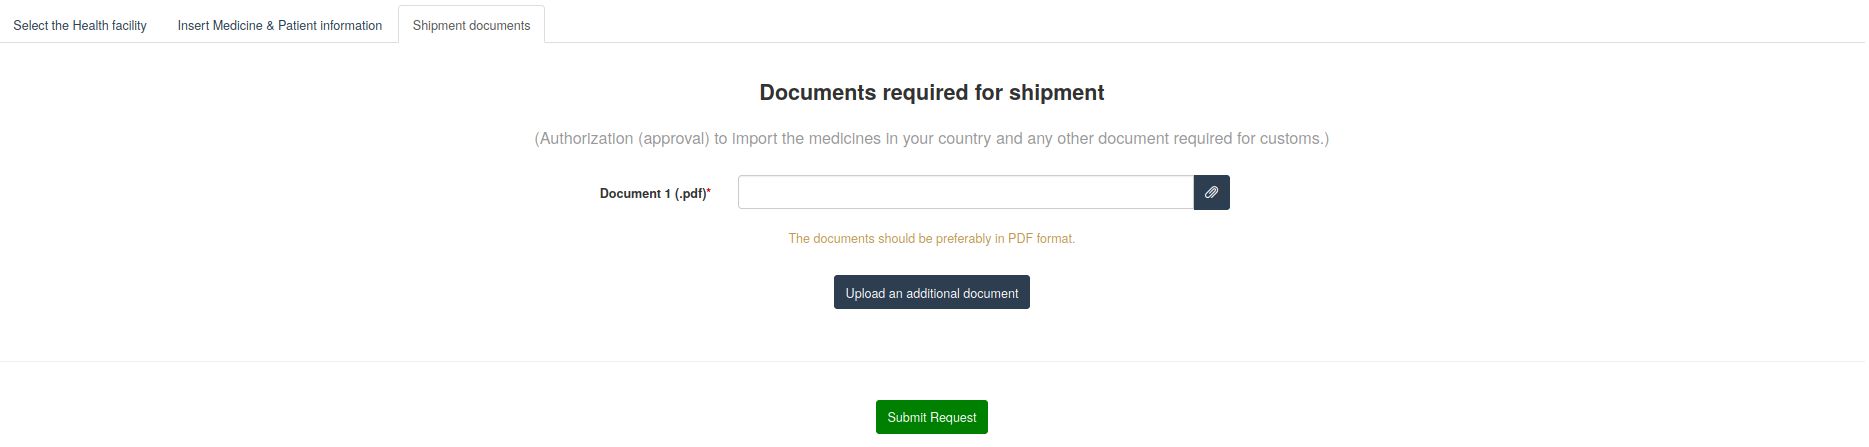 Documents required for shipment